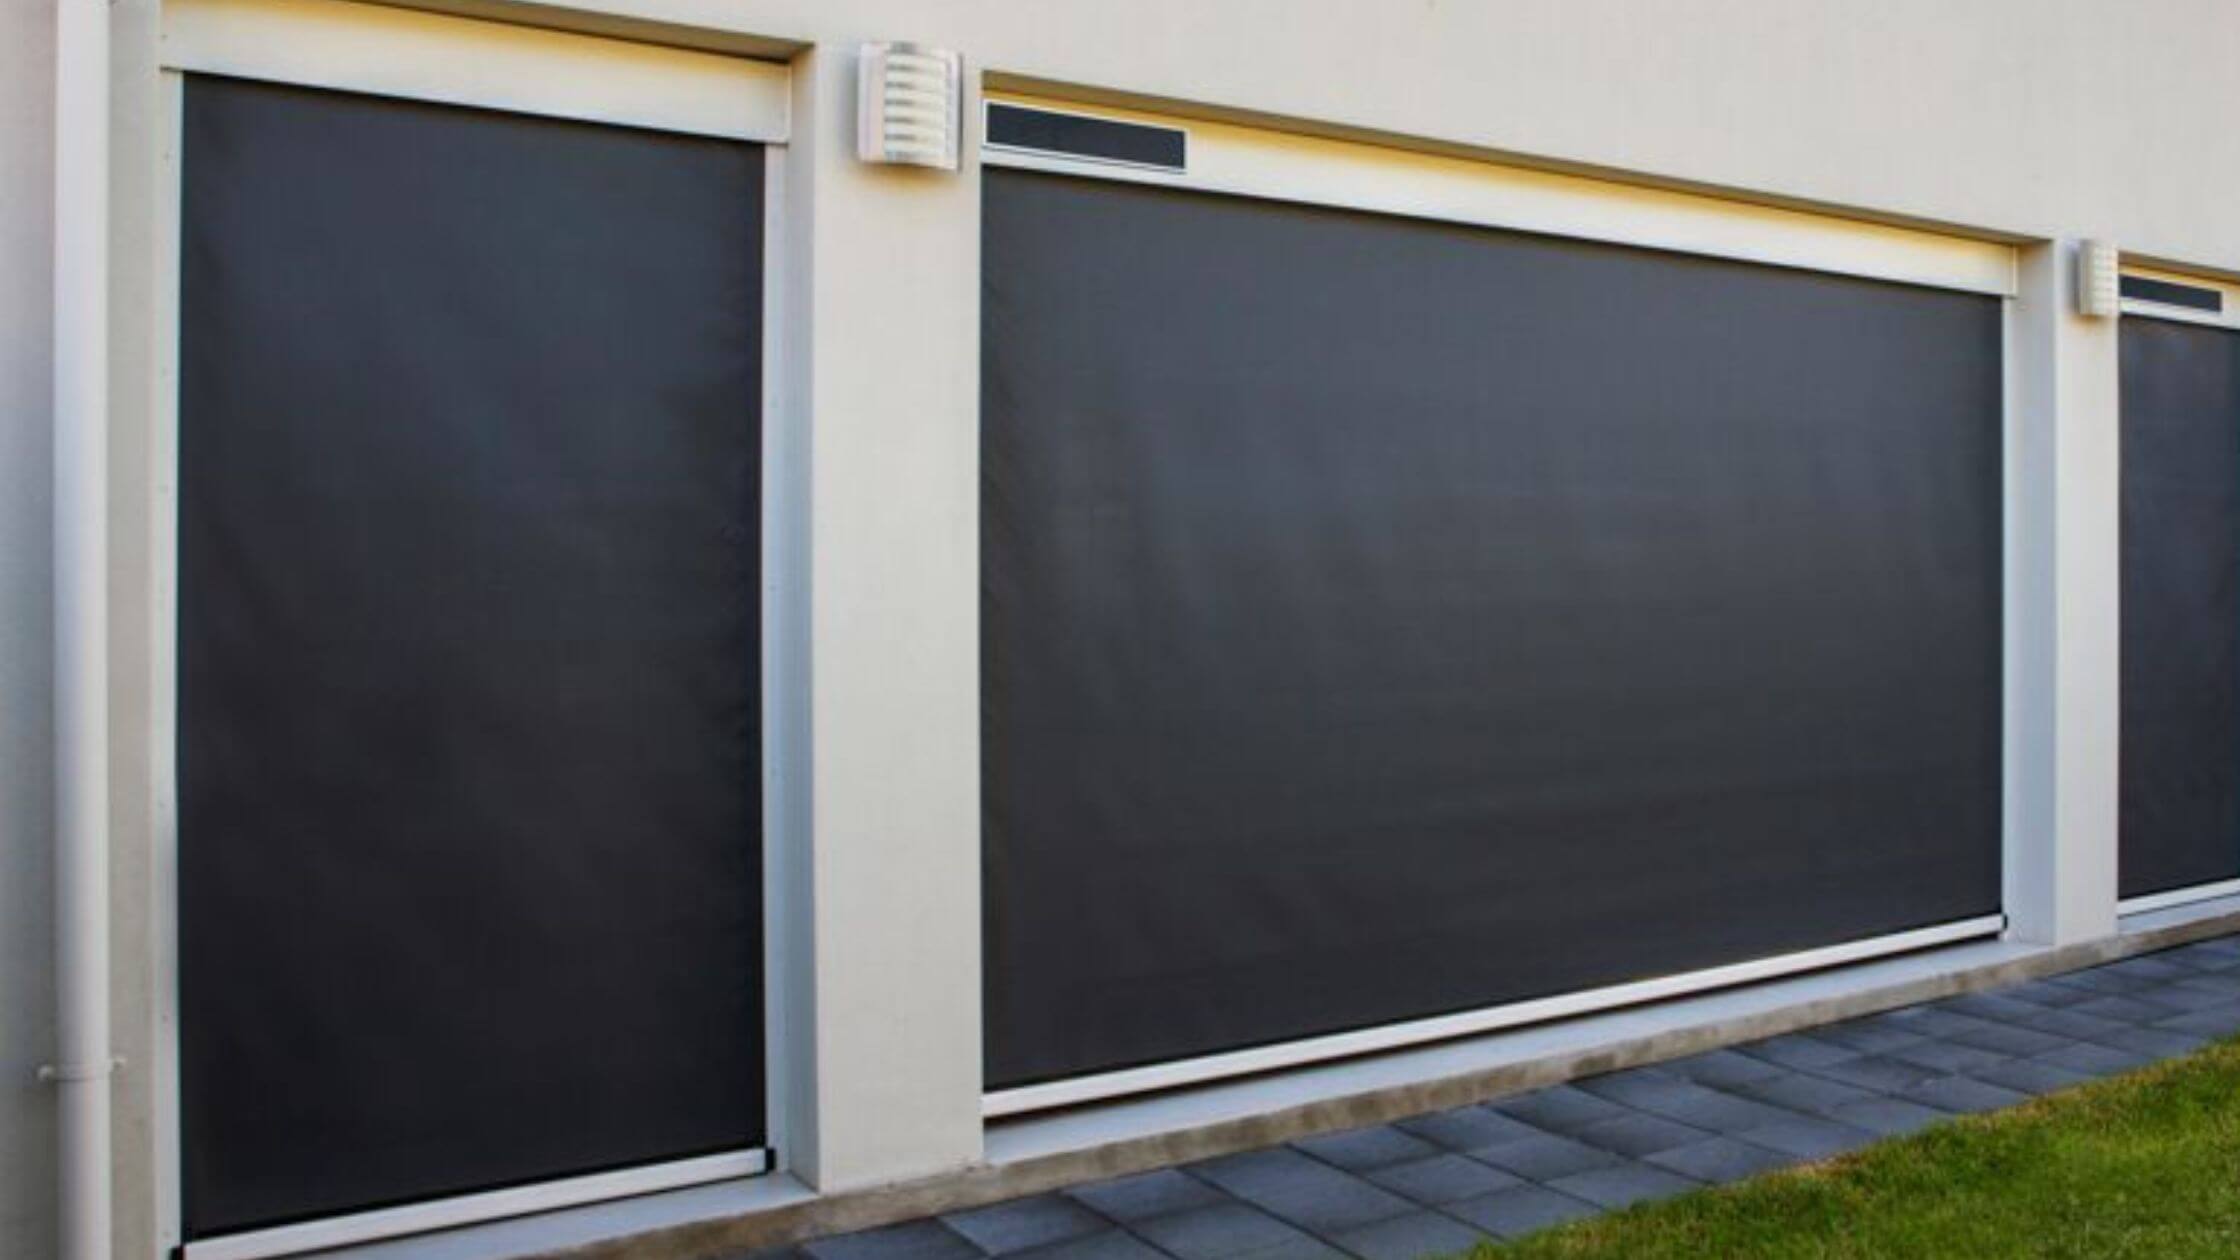 How Beneficial Are The Blockout Blinds During Cooler Weather?